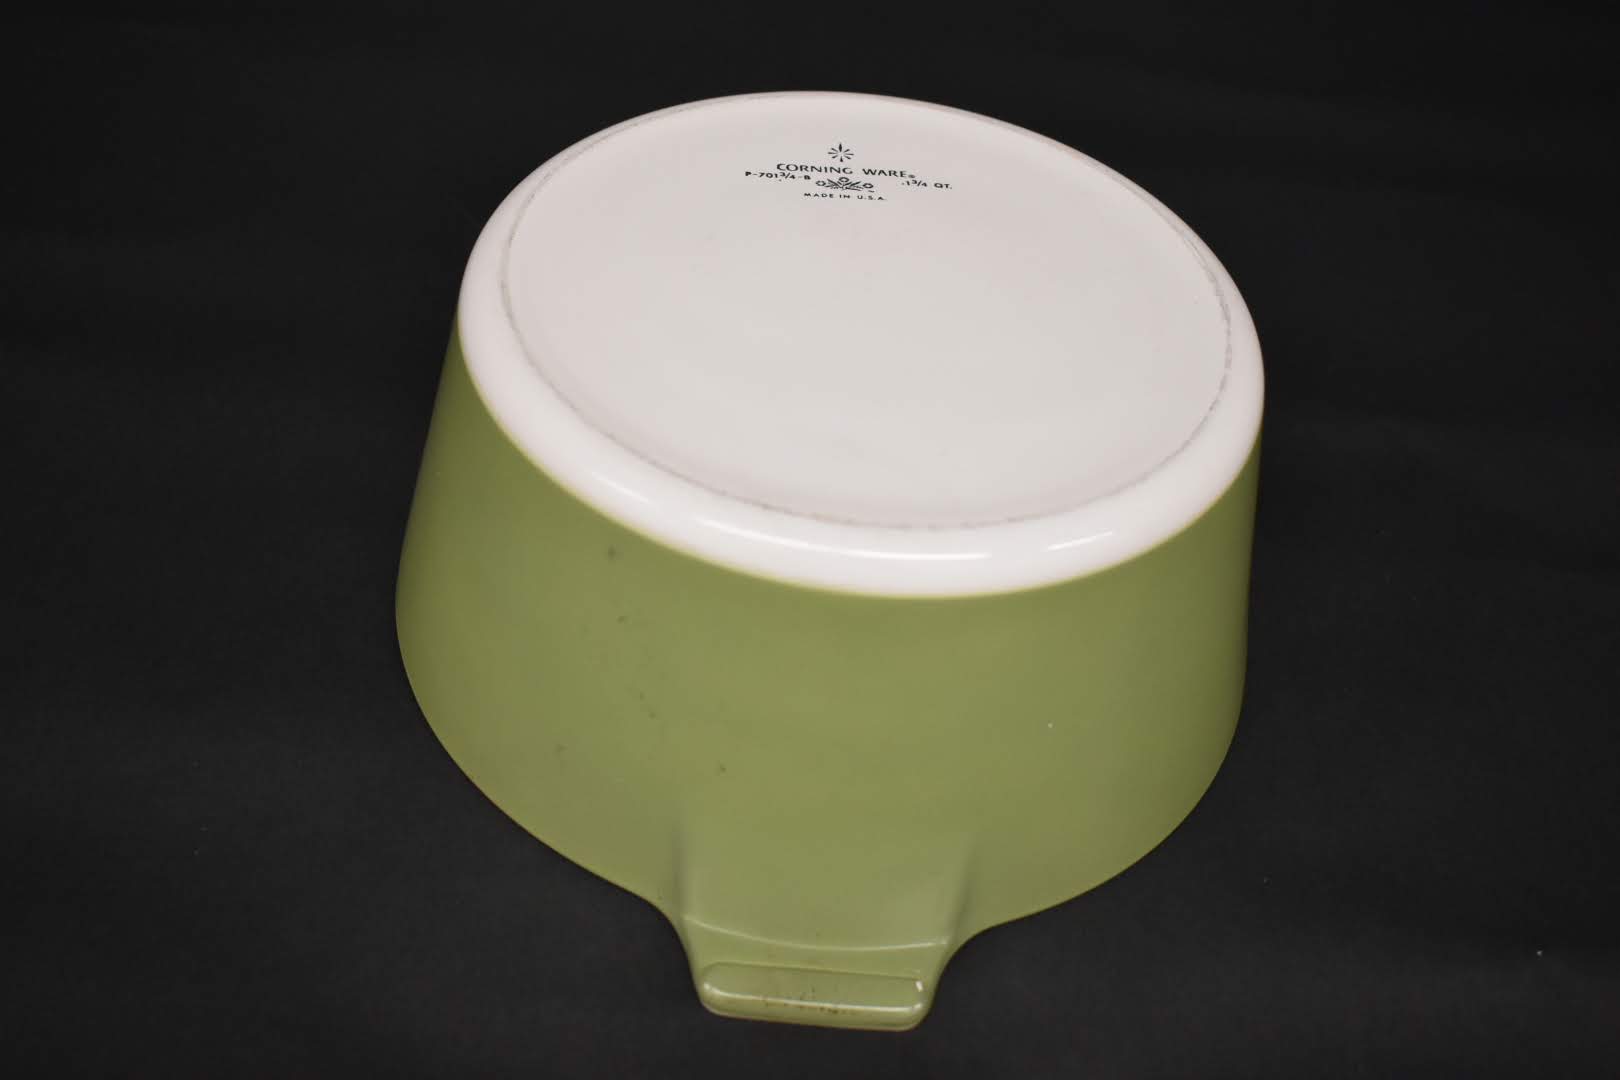 White Green Color - Mid Century Corningware Casserole - Round Shape Without Lid